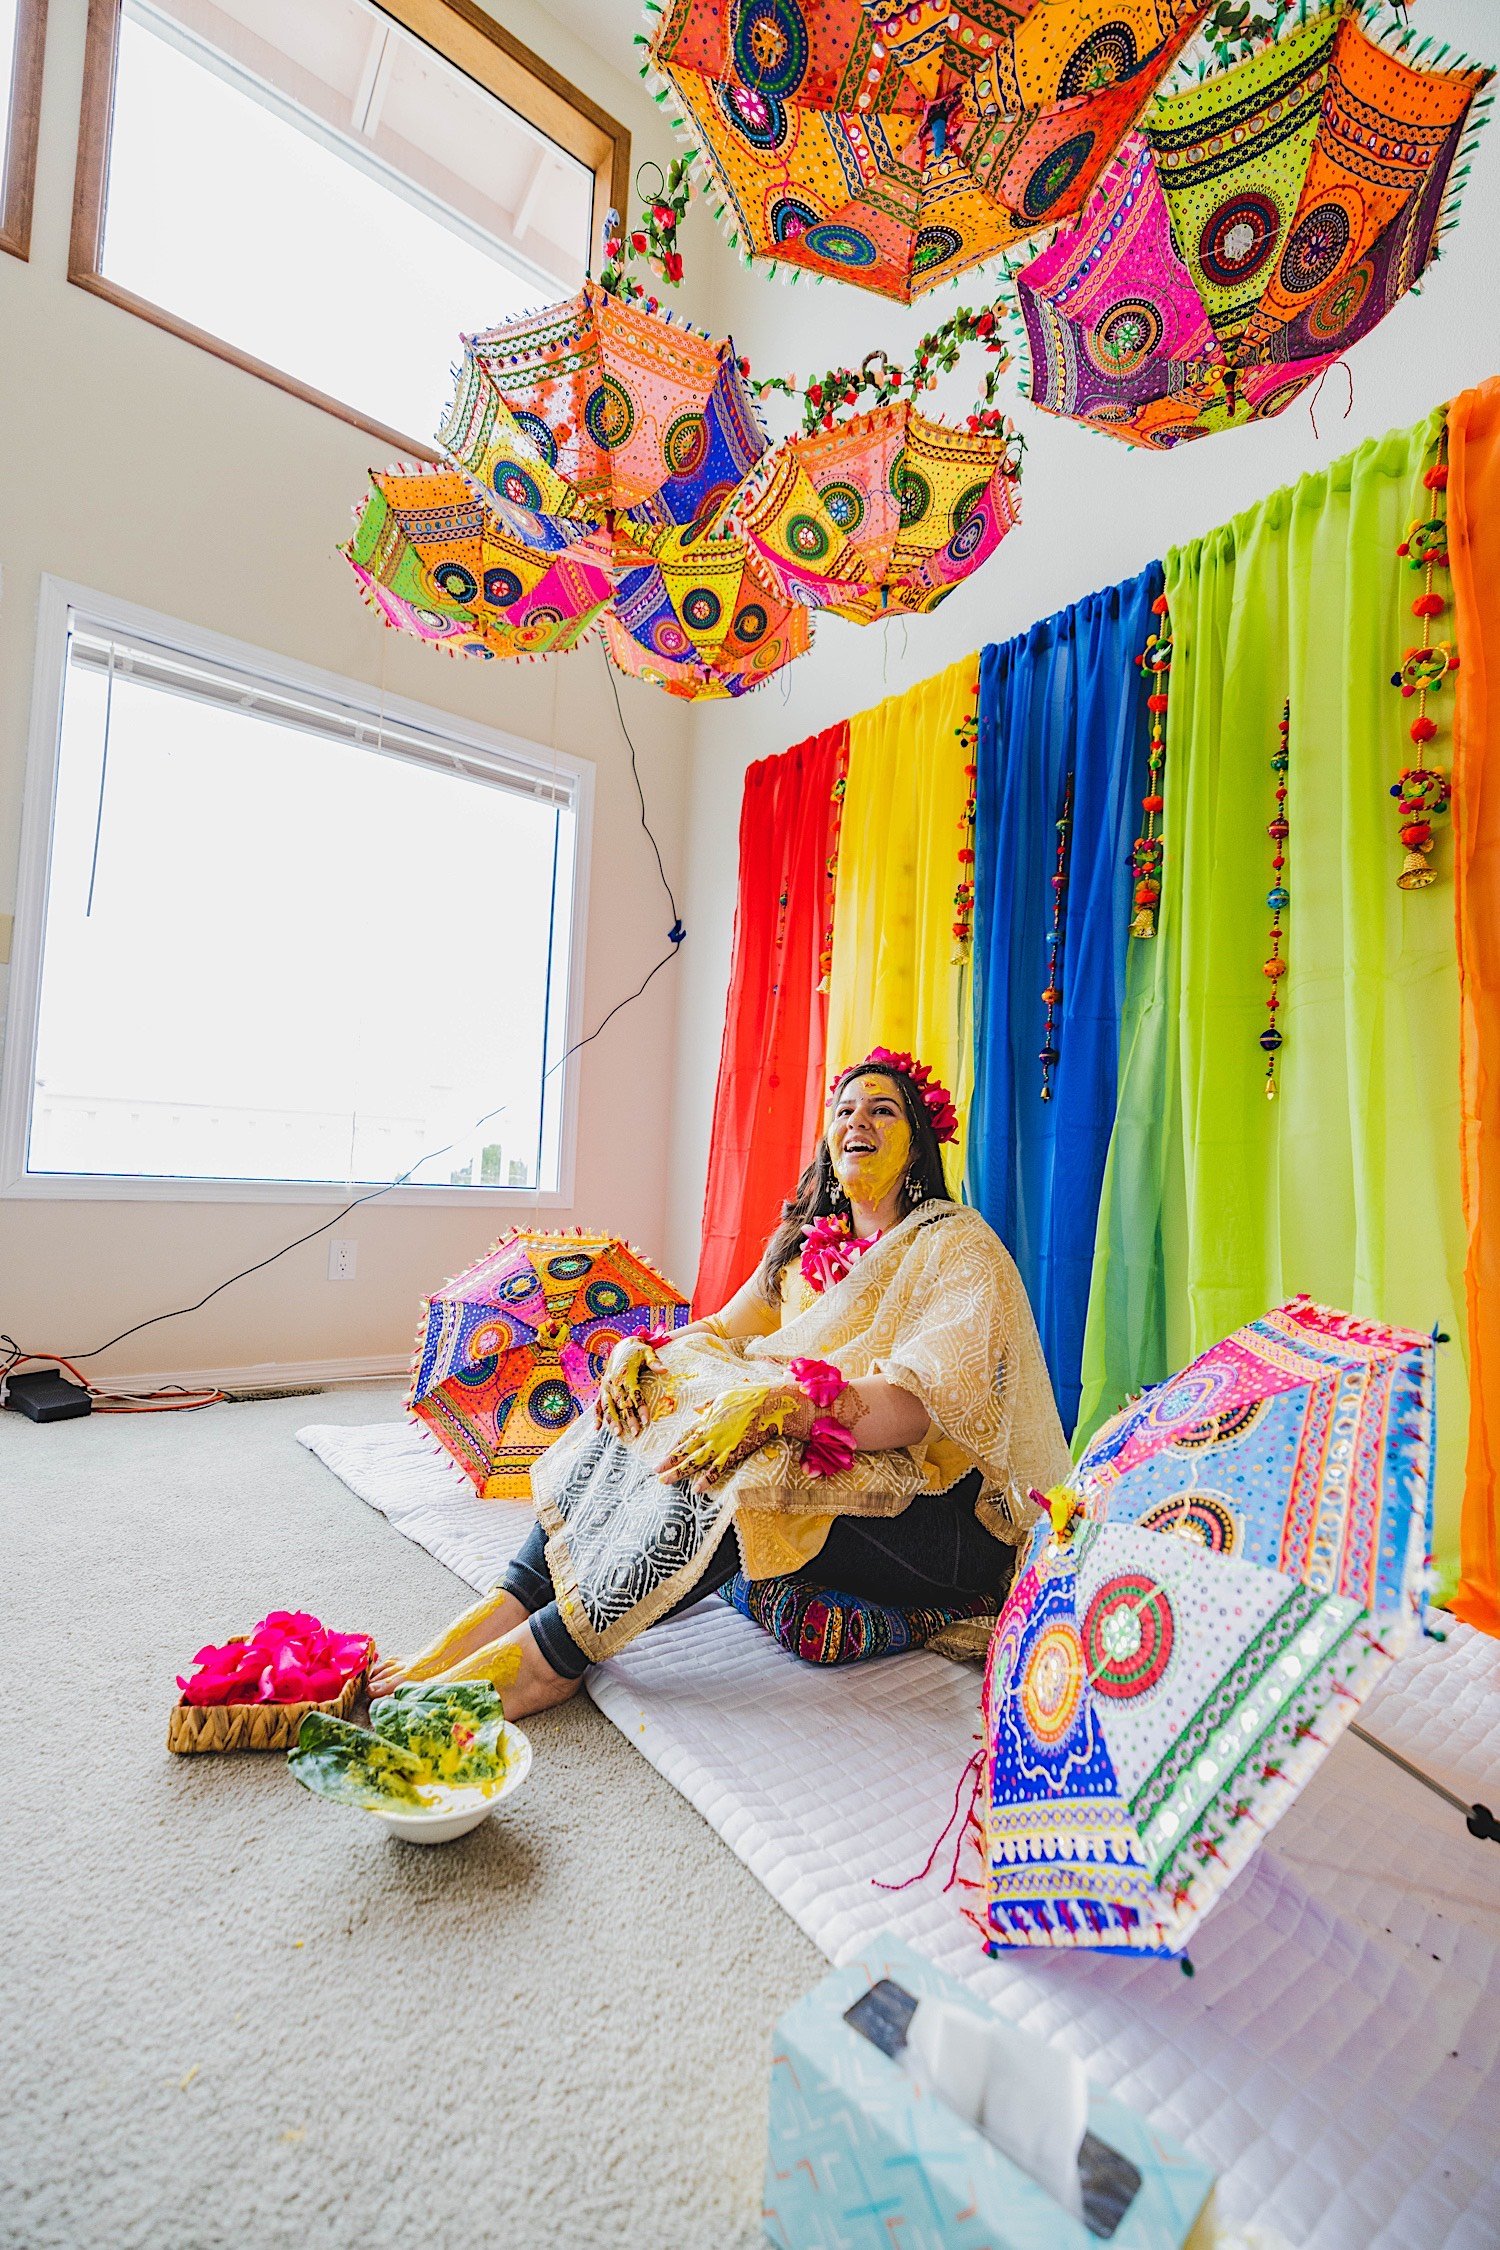 Bride to be covered in turmeric sits in front of multicolored backdrop and colorful umbrellas before traditional Haldi celebration